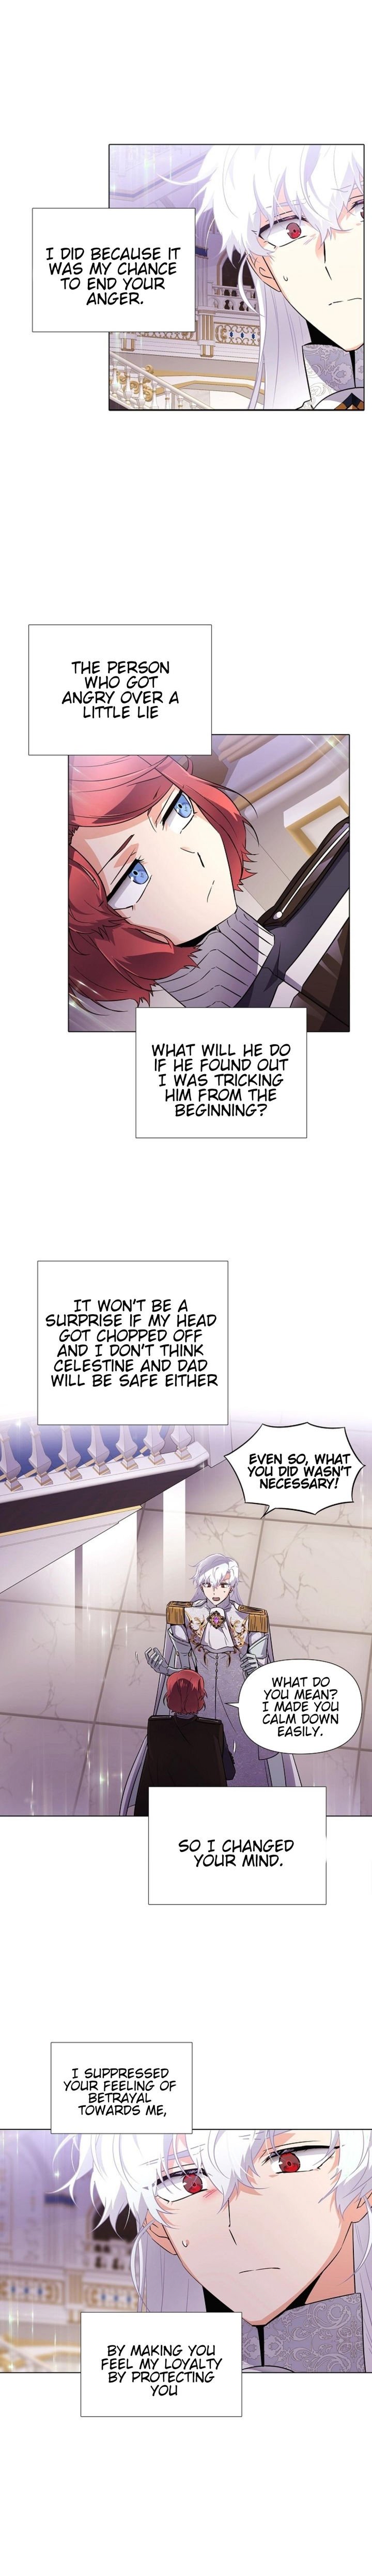 the-villain-discovered-my-identity-chap-38-2